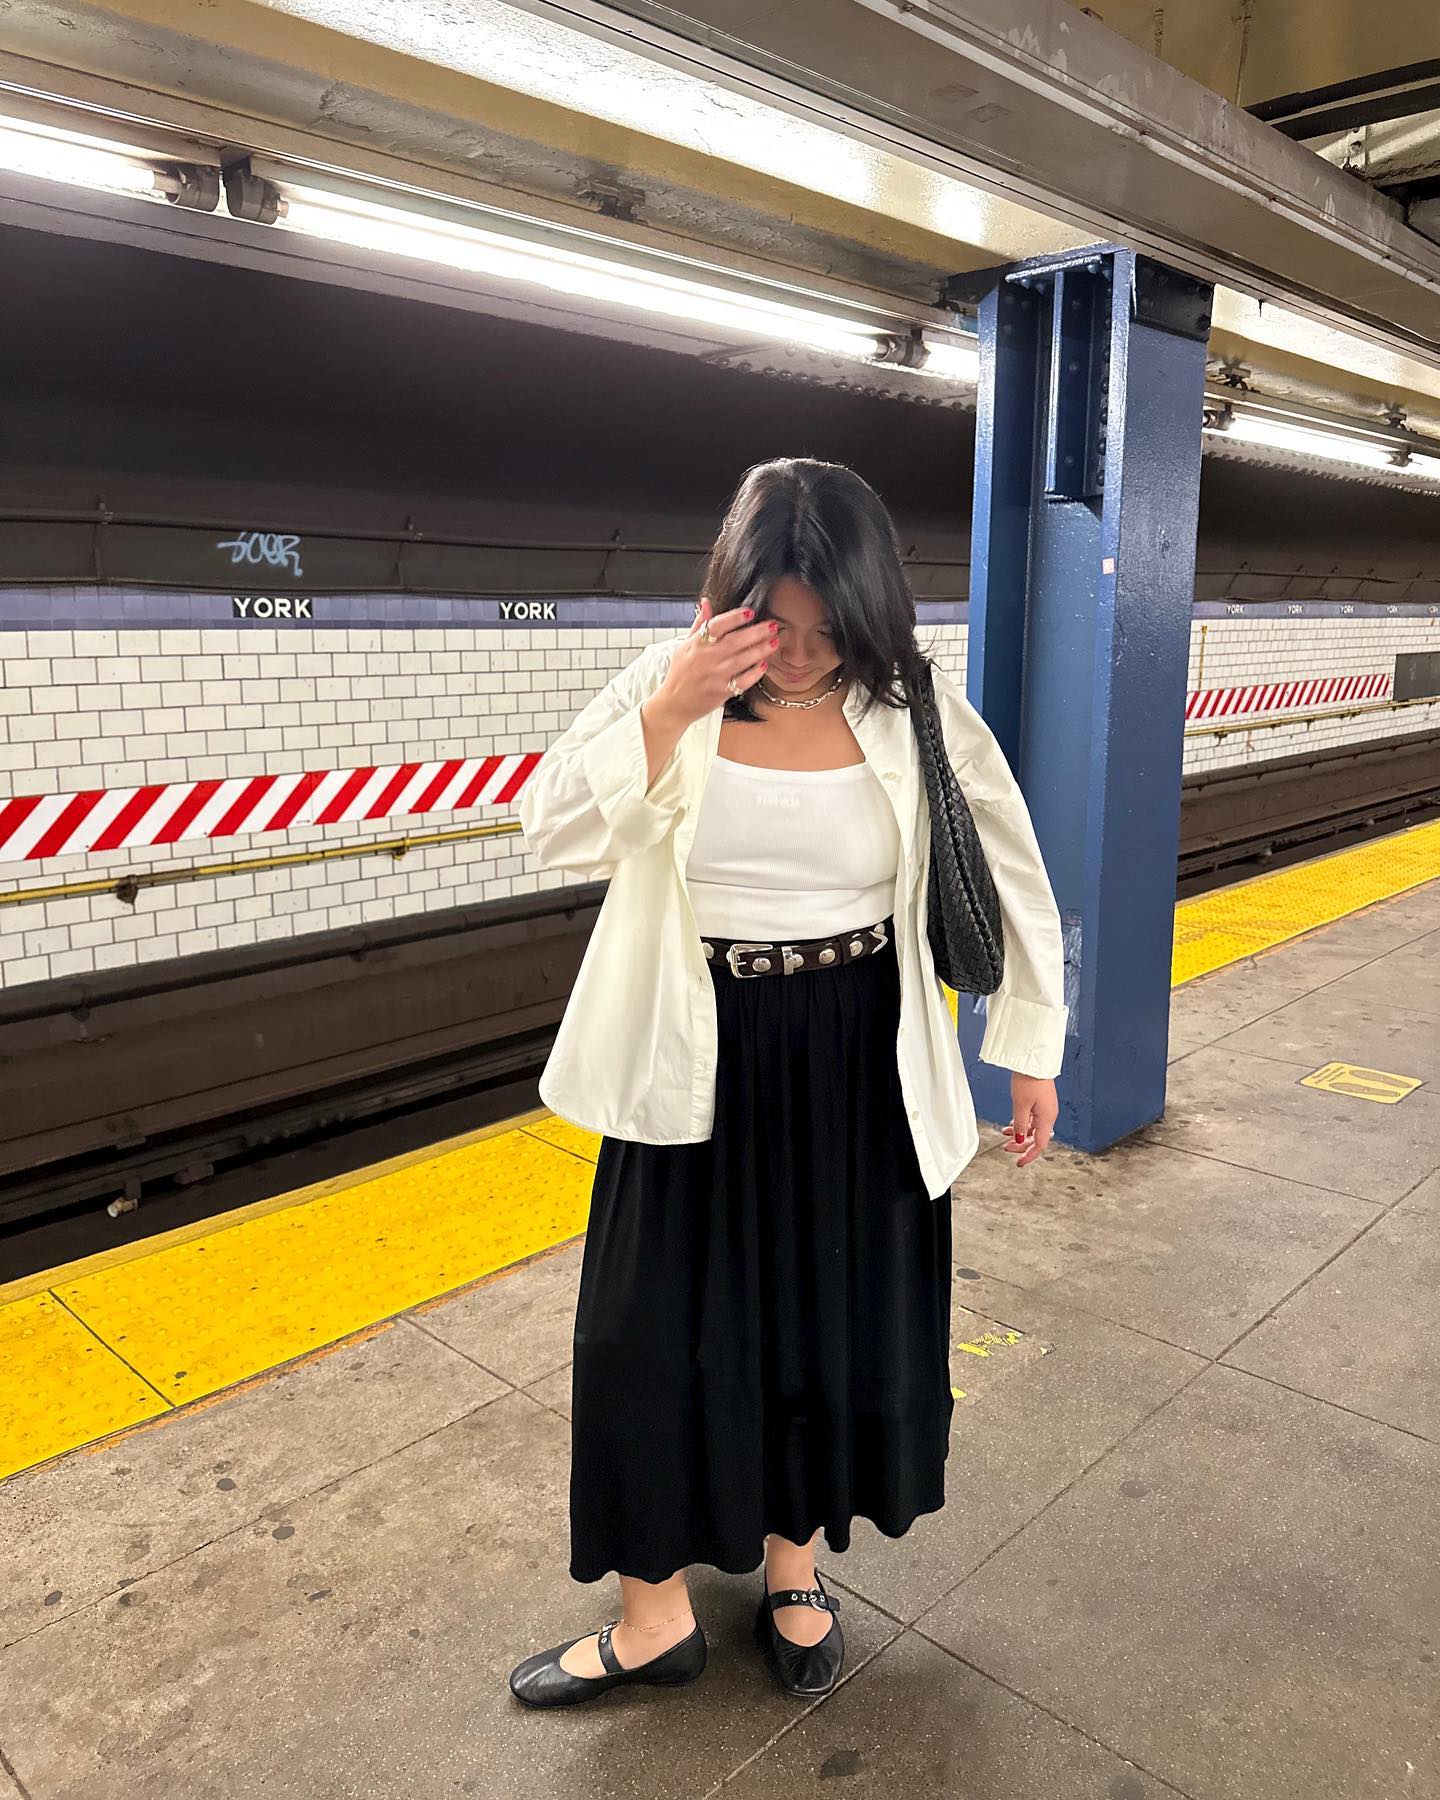 stylish mid-size woman poses on the subway platform in NYC wearing a white button-down shirt, white tank top, studded black belt, black full skirt, and black Mary-Jane flats